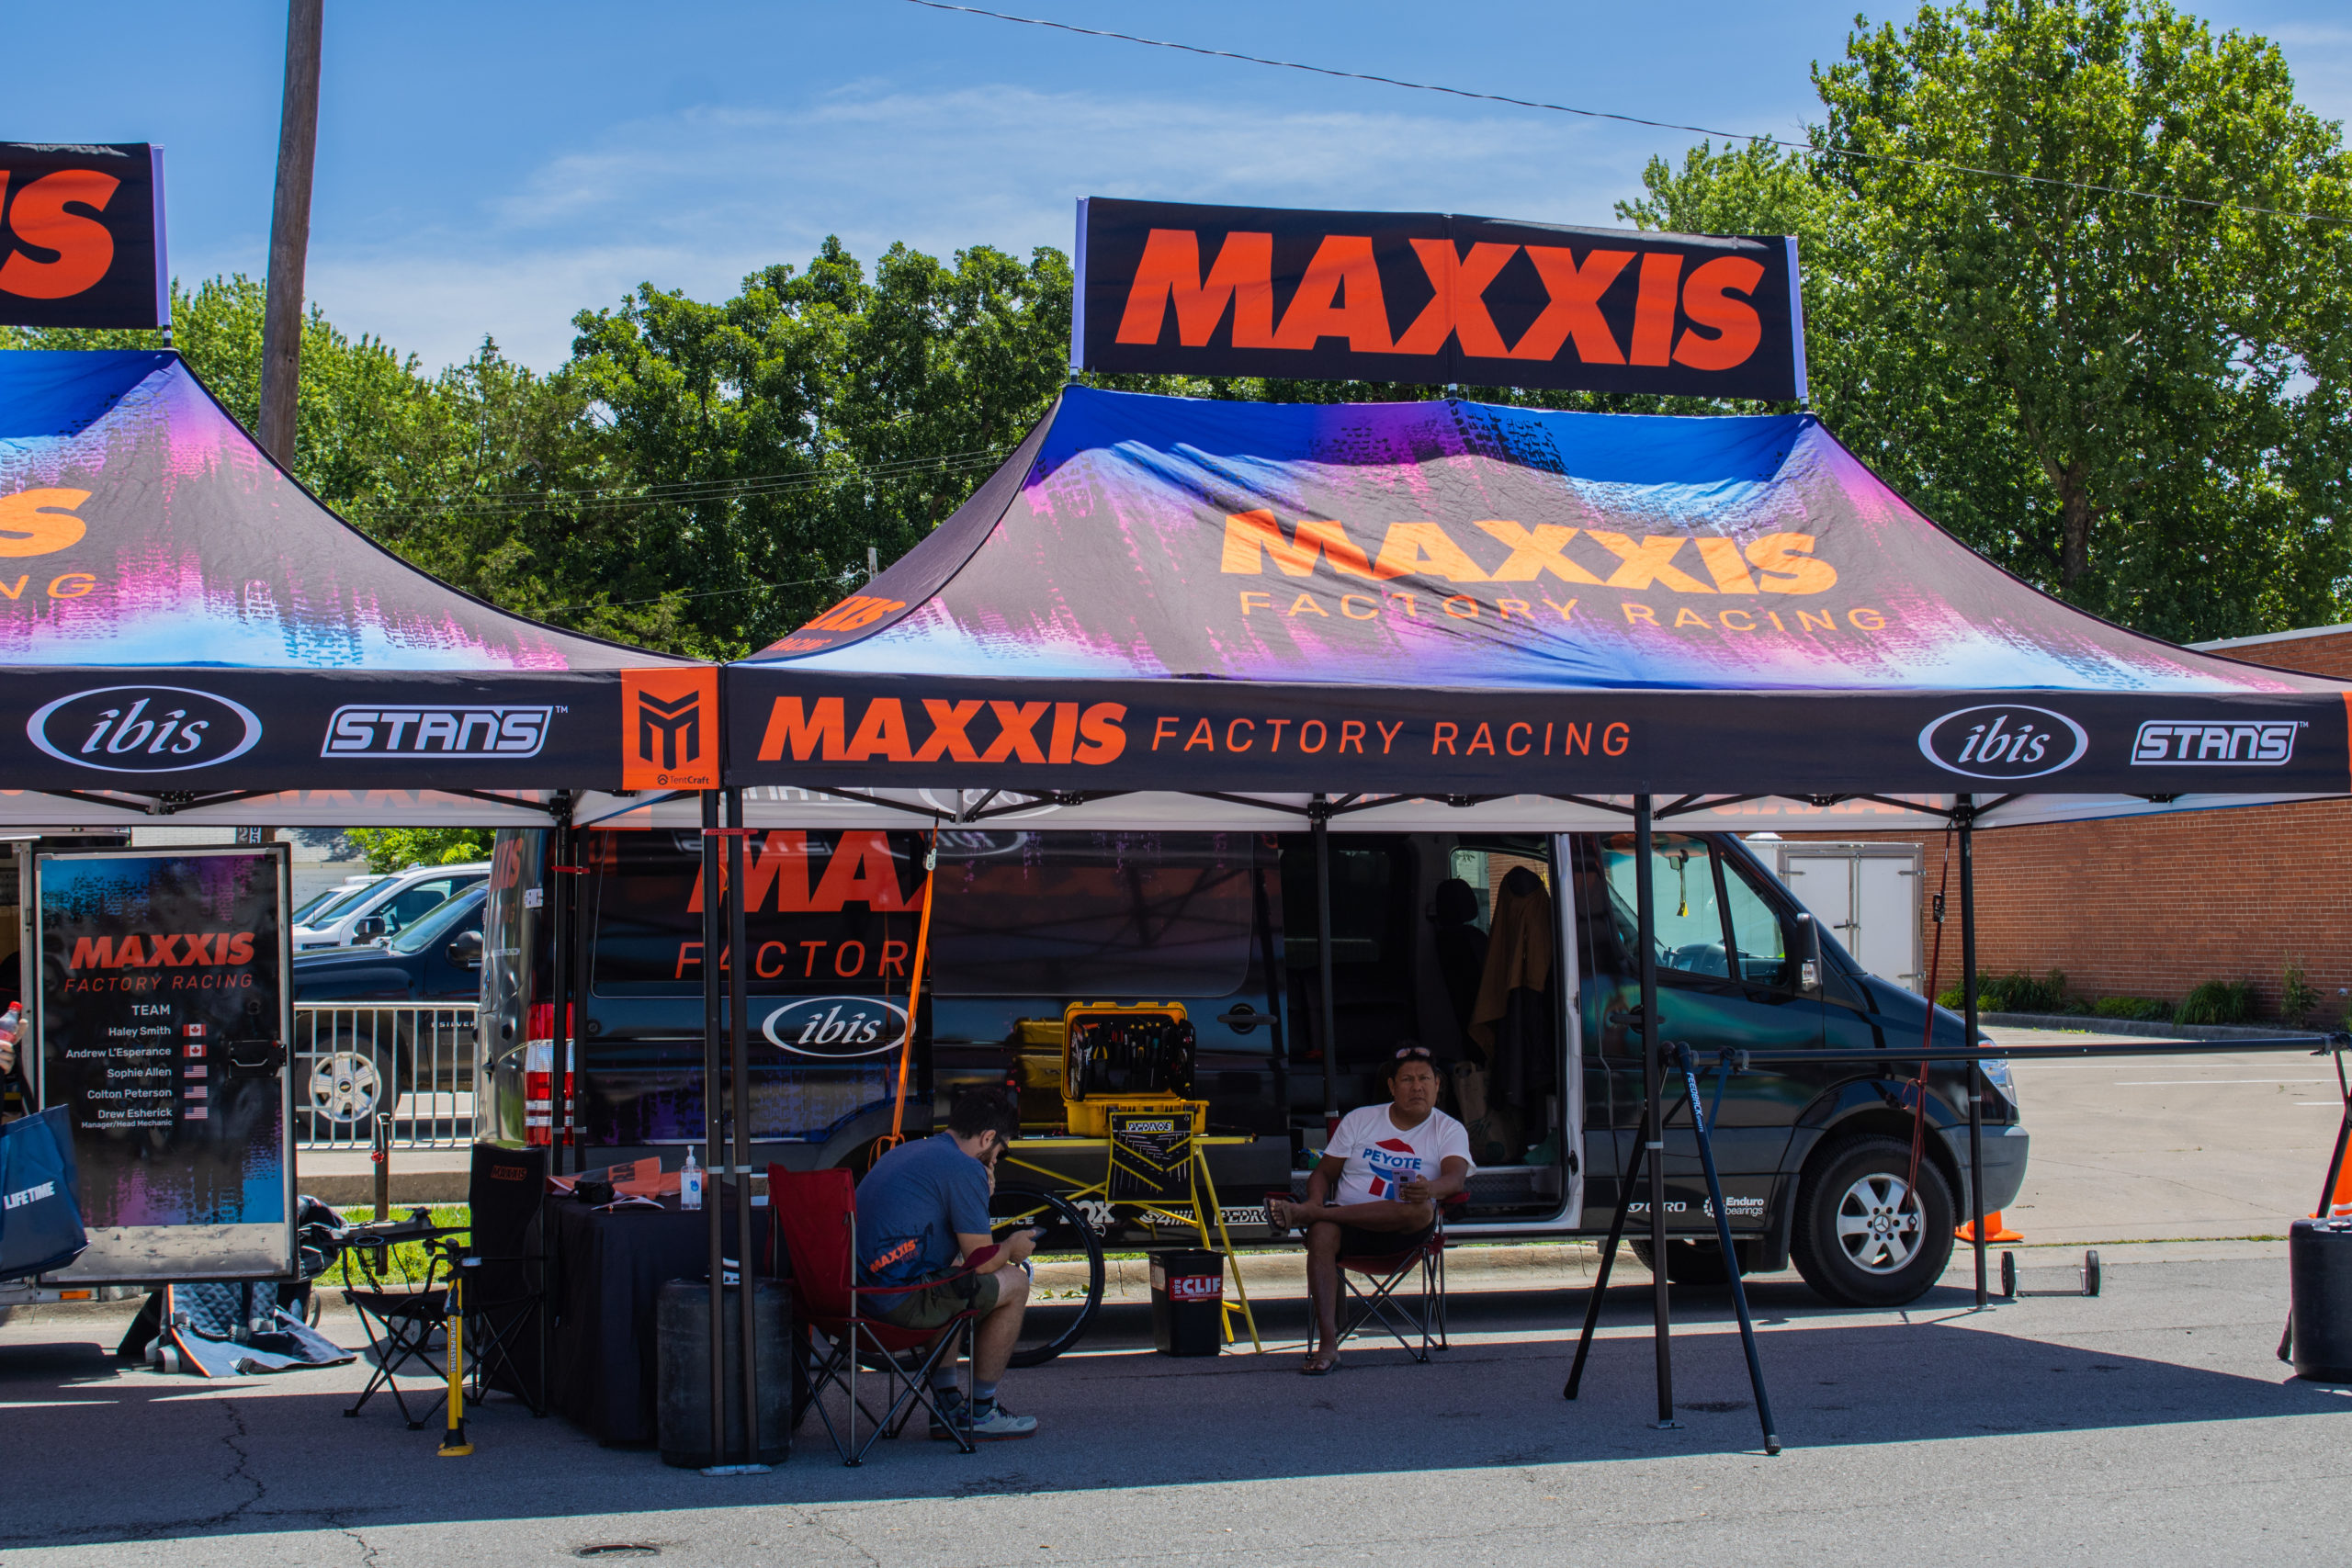 Maxxis Factory Racing tents